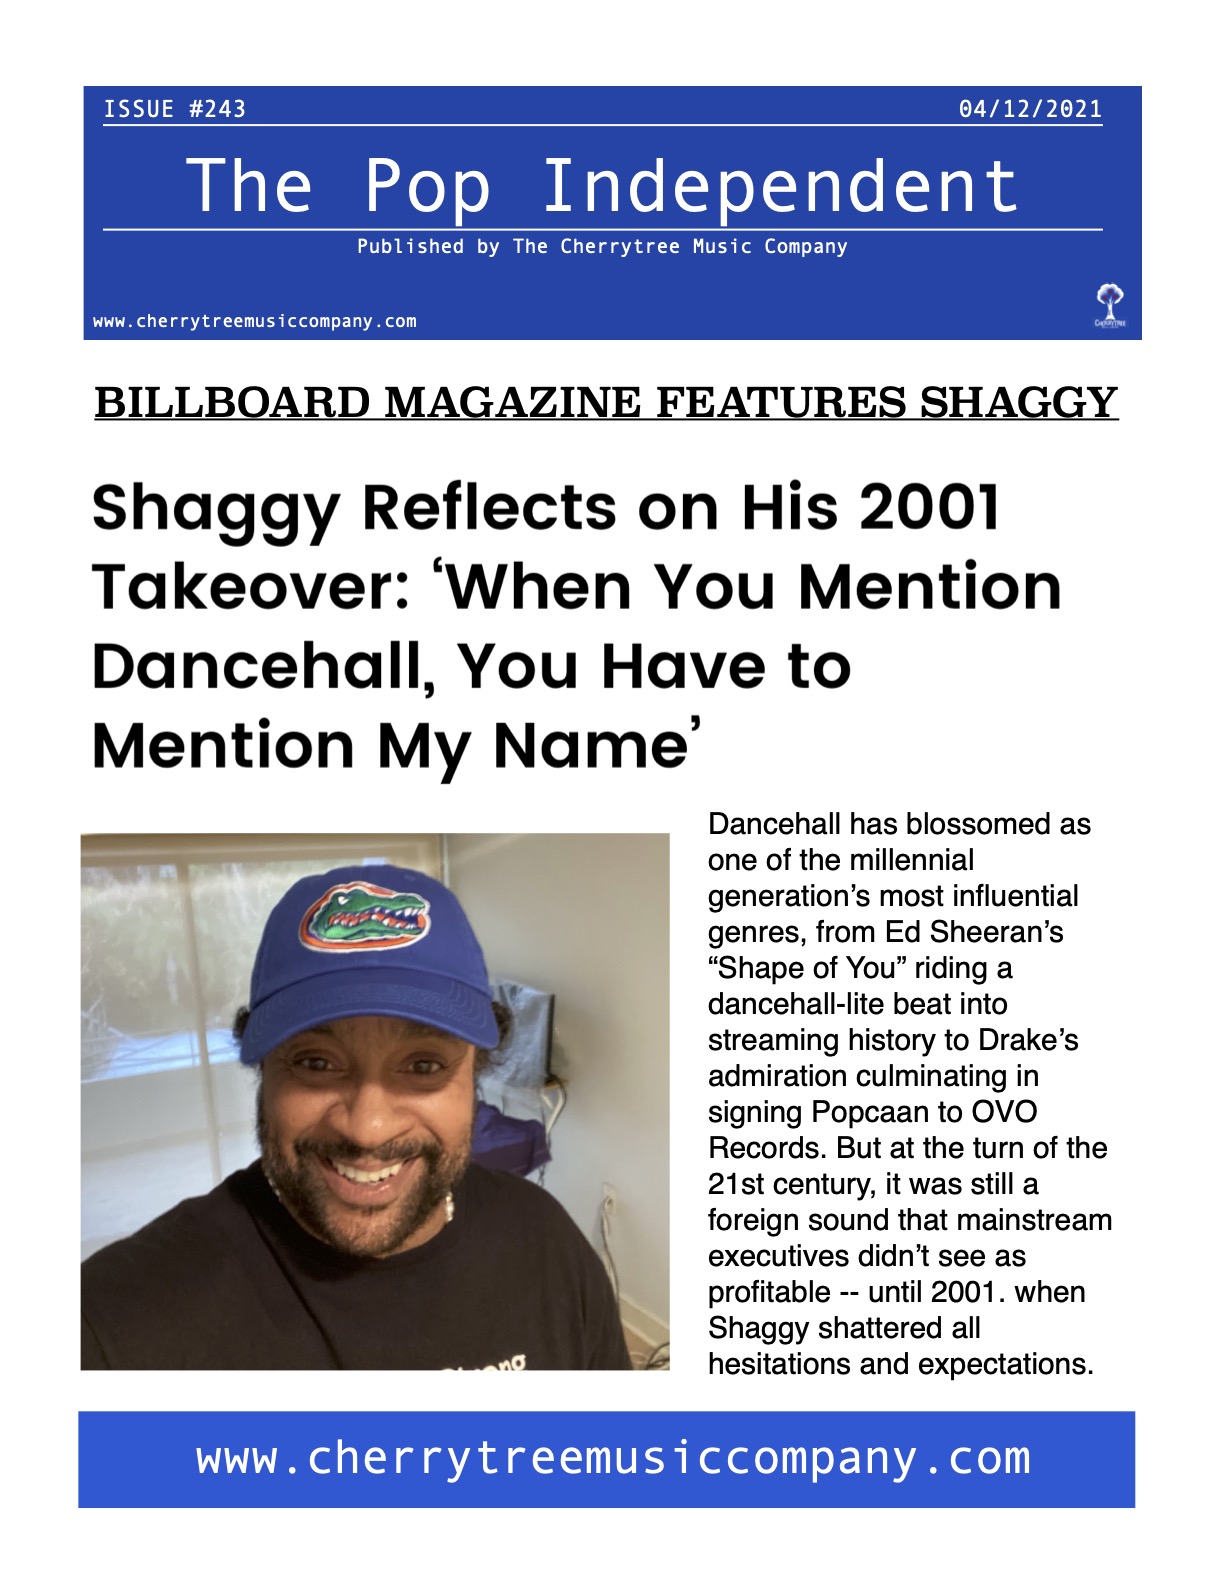 The Pop Independent, Issue 243